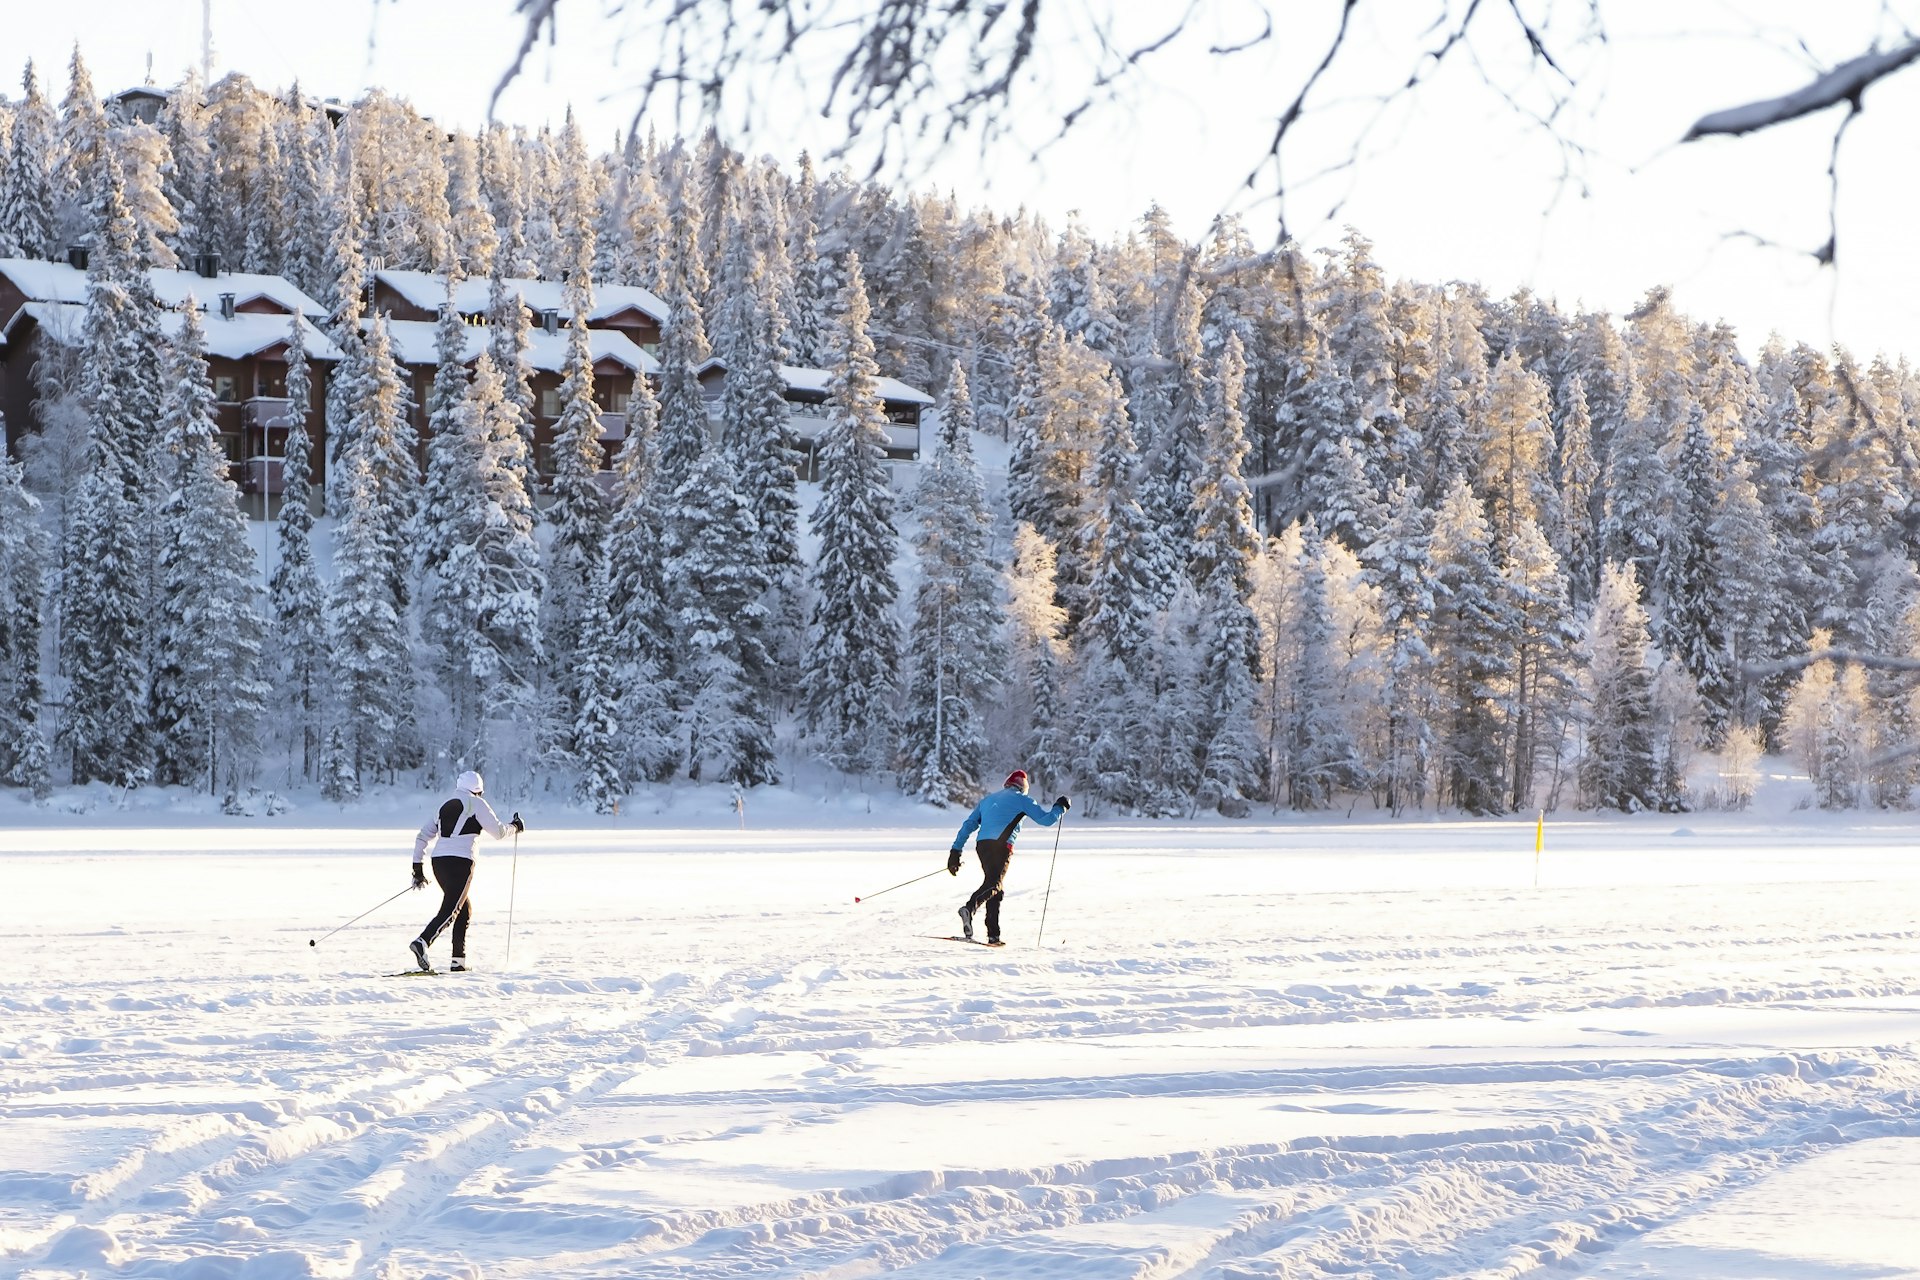 Two cross-country skiers in a snow-covered forest, Ruka, Lapland, Finland